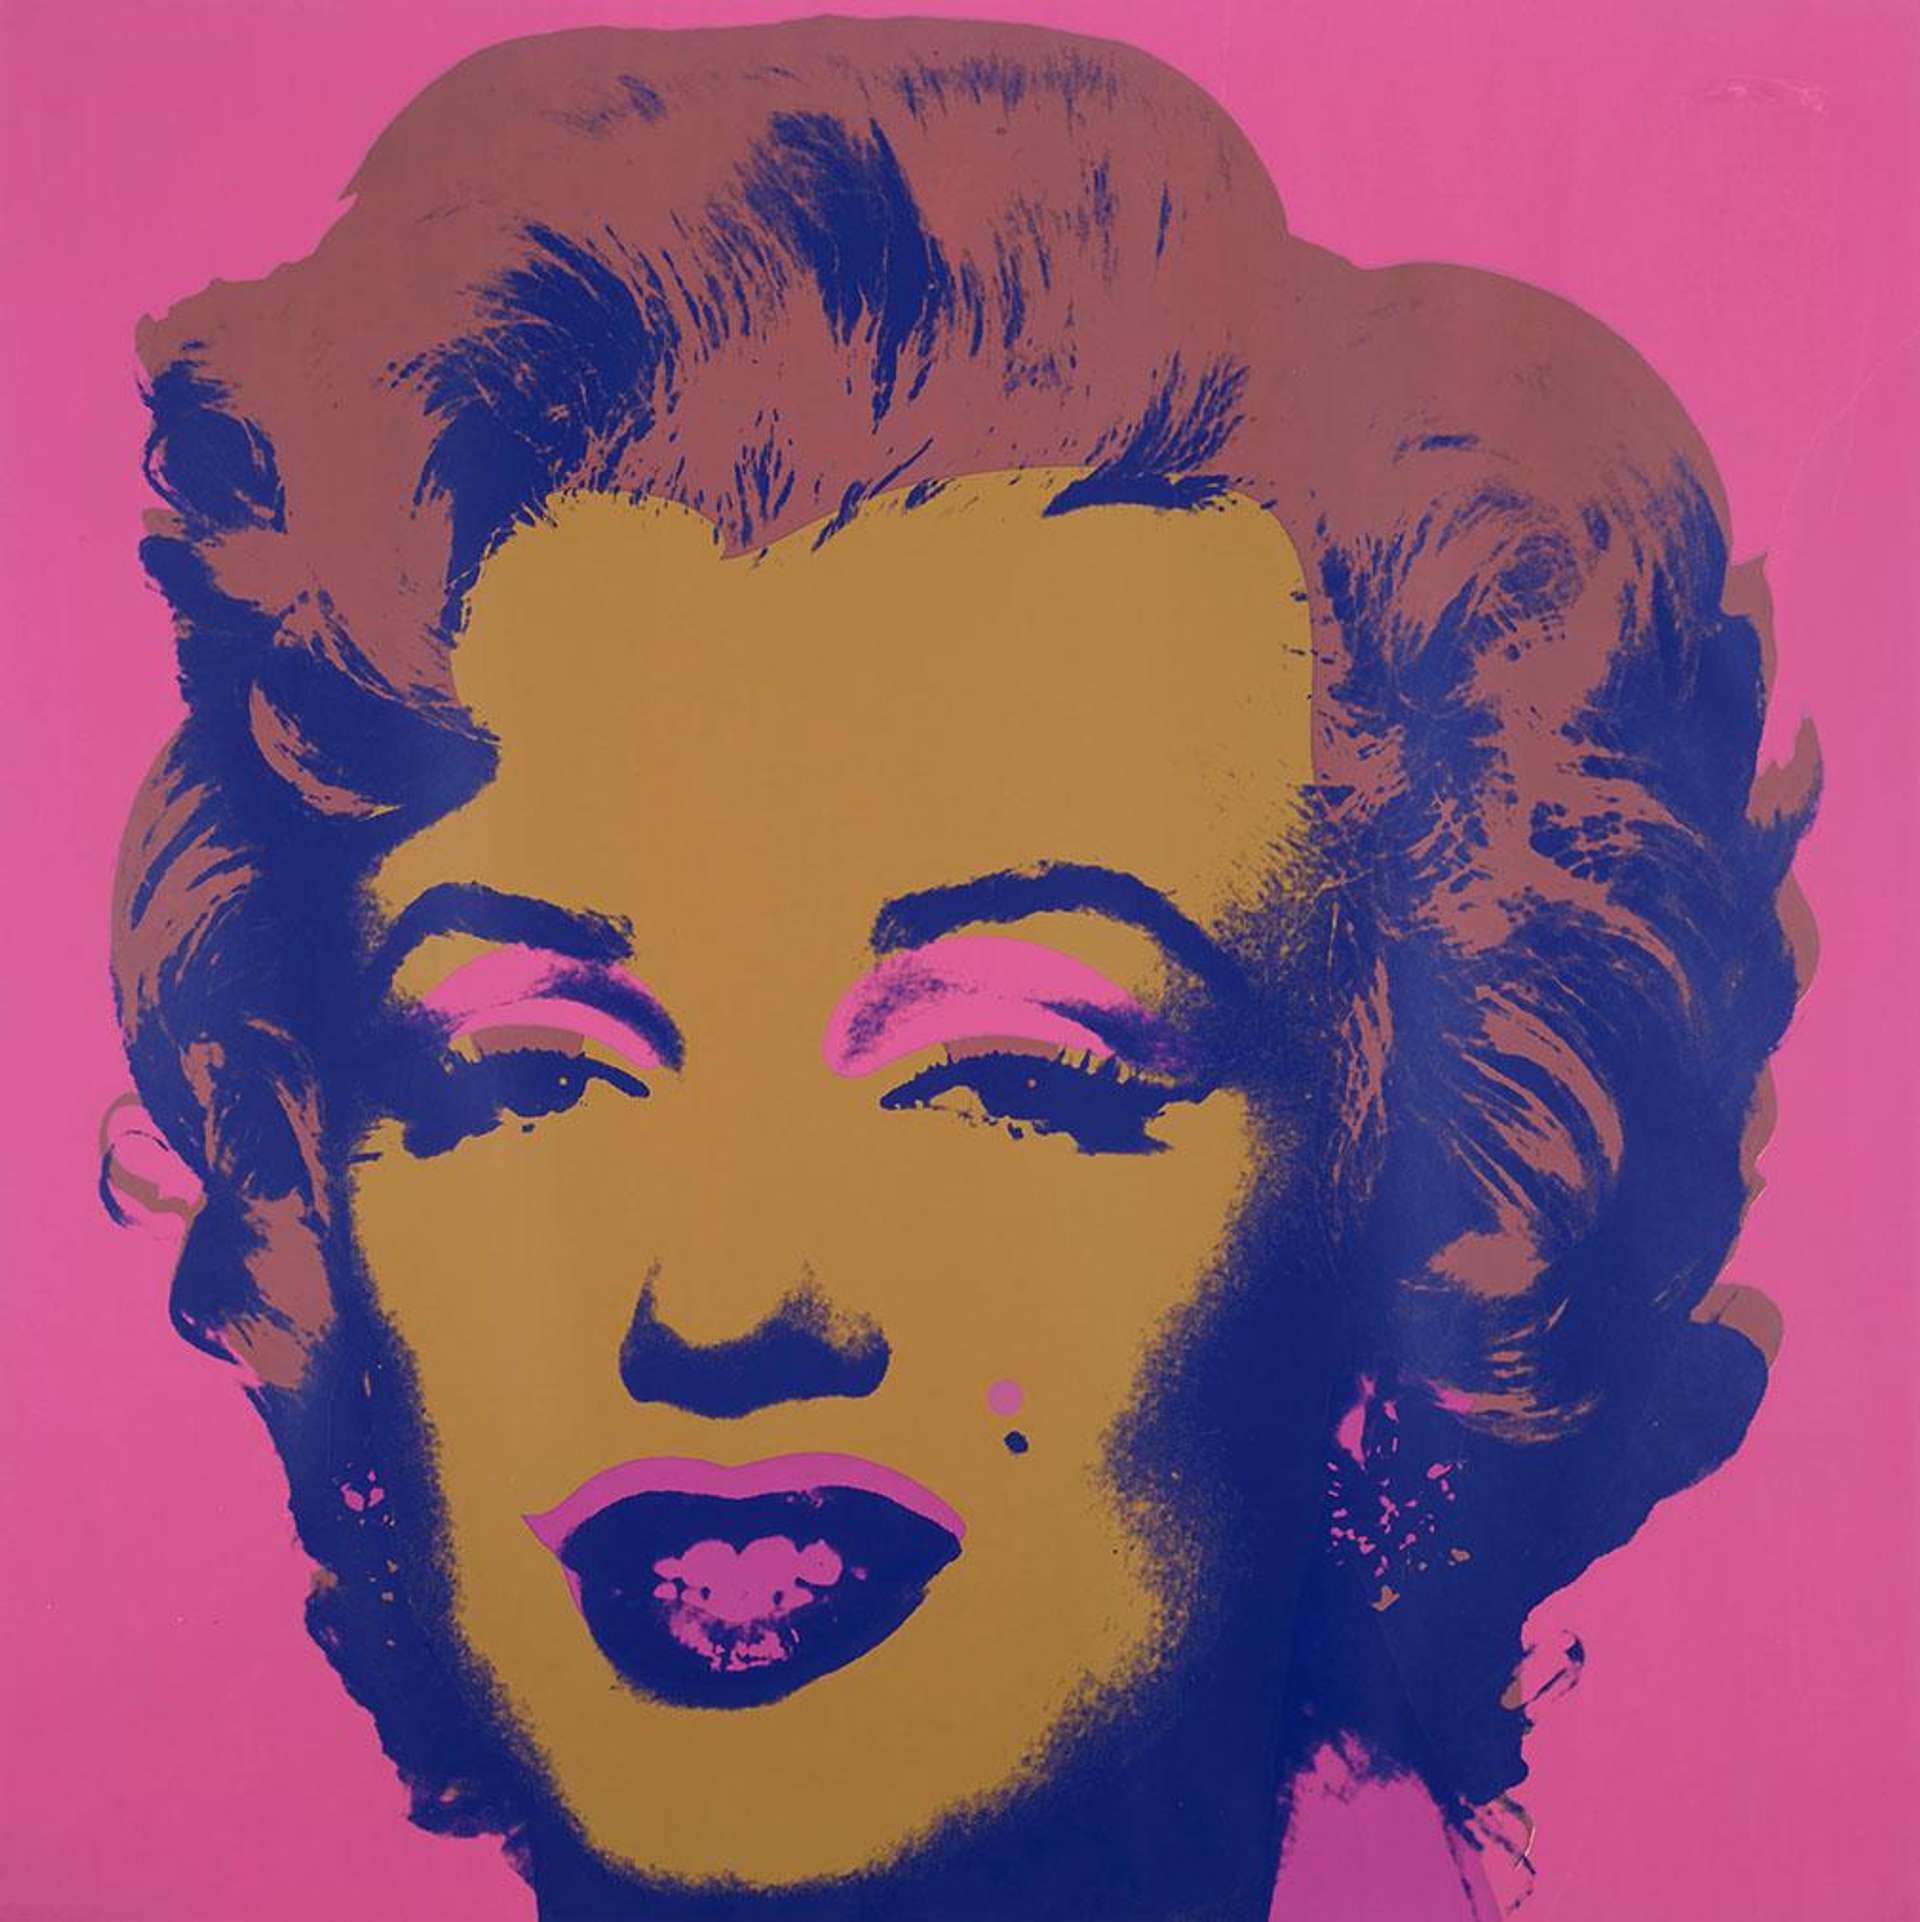 An image of a print by Andy Warhol, depicting actress Marilyn Monroe in shades of pink, purple and yellow.